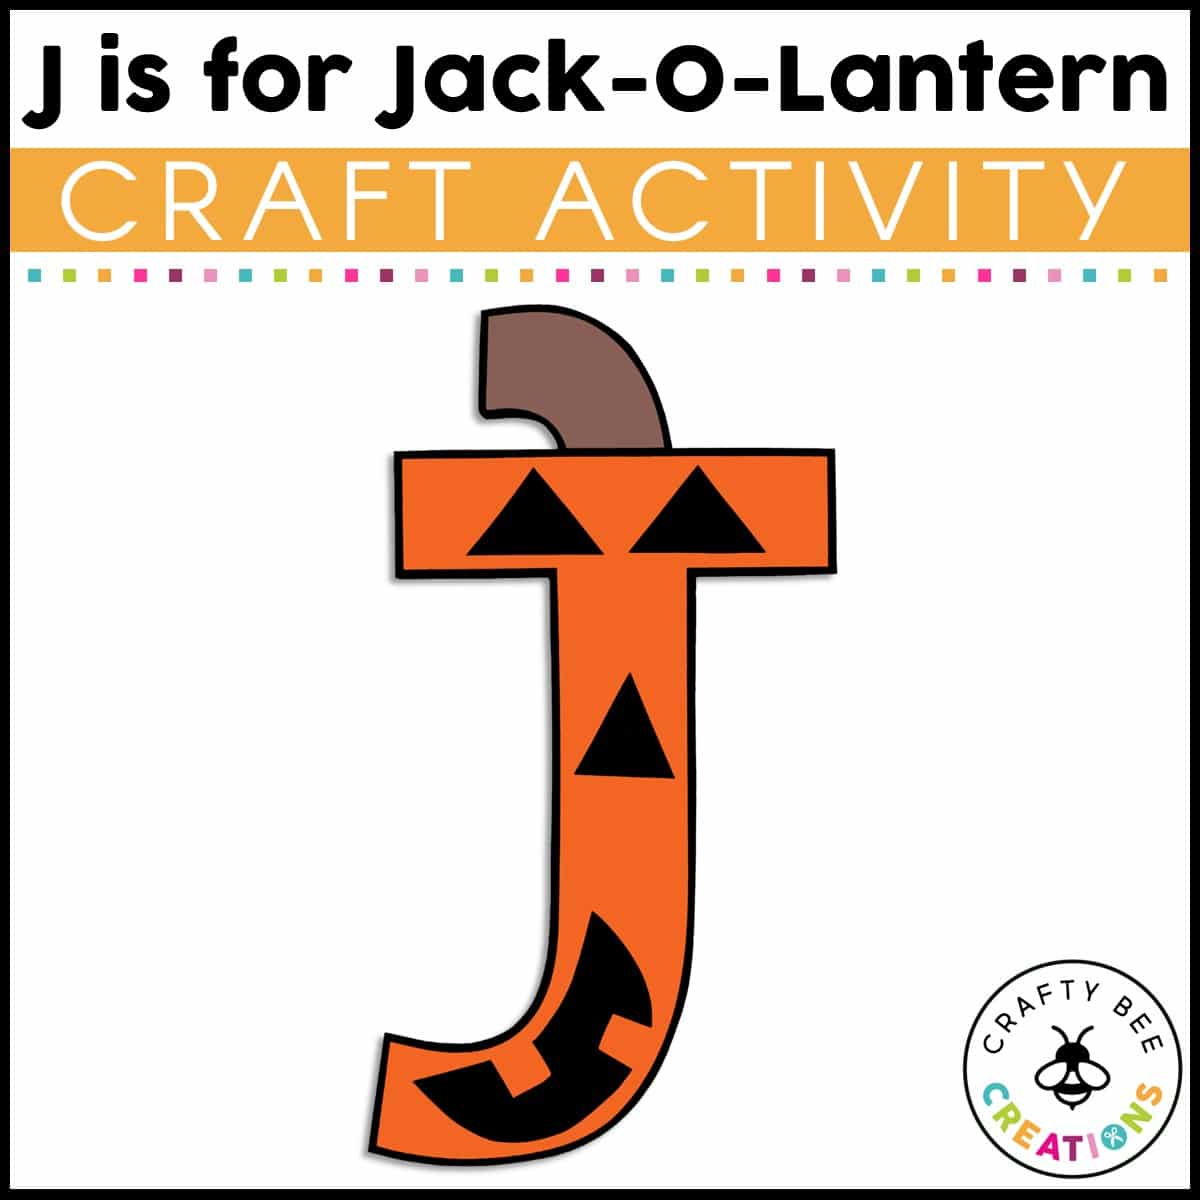 Blanco vliegtuigen account Uppercase Letter J is for Jack-O-Lantern Craft Activity - Crafty Bee  Creations